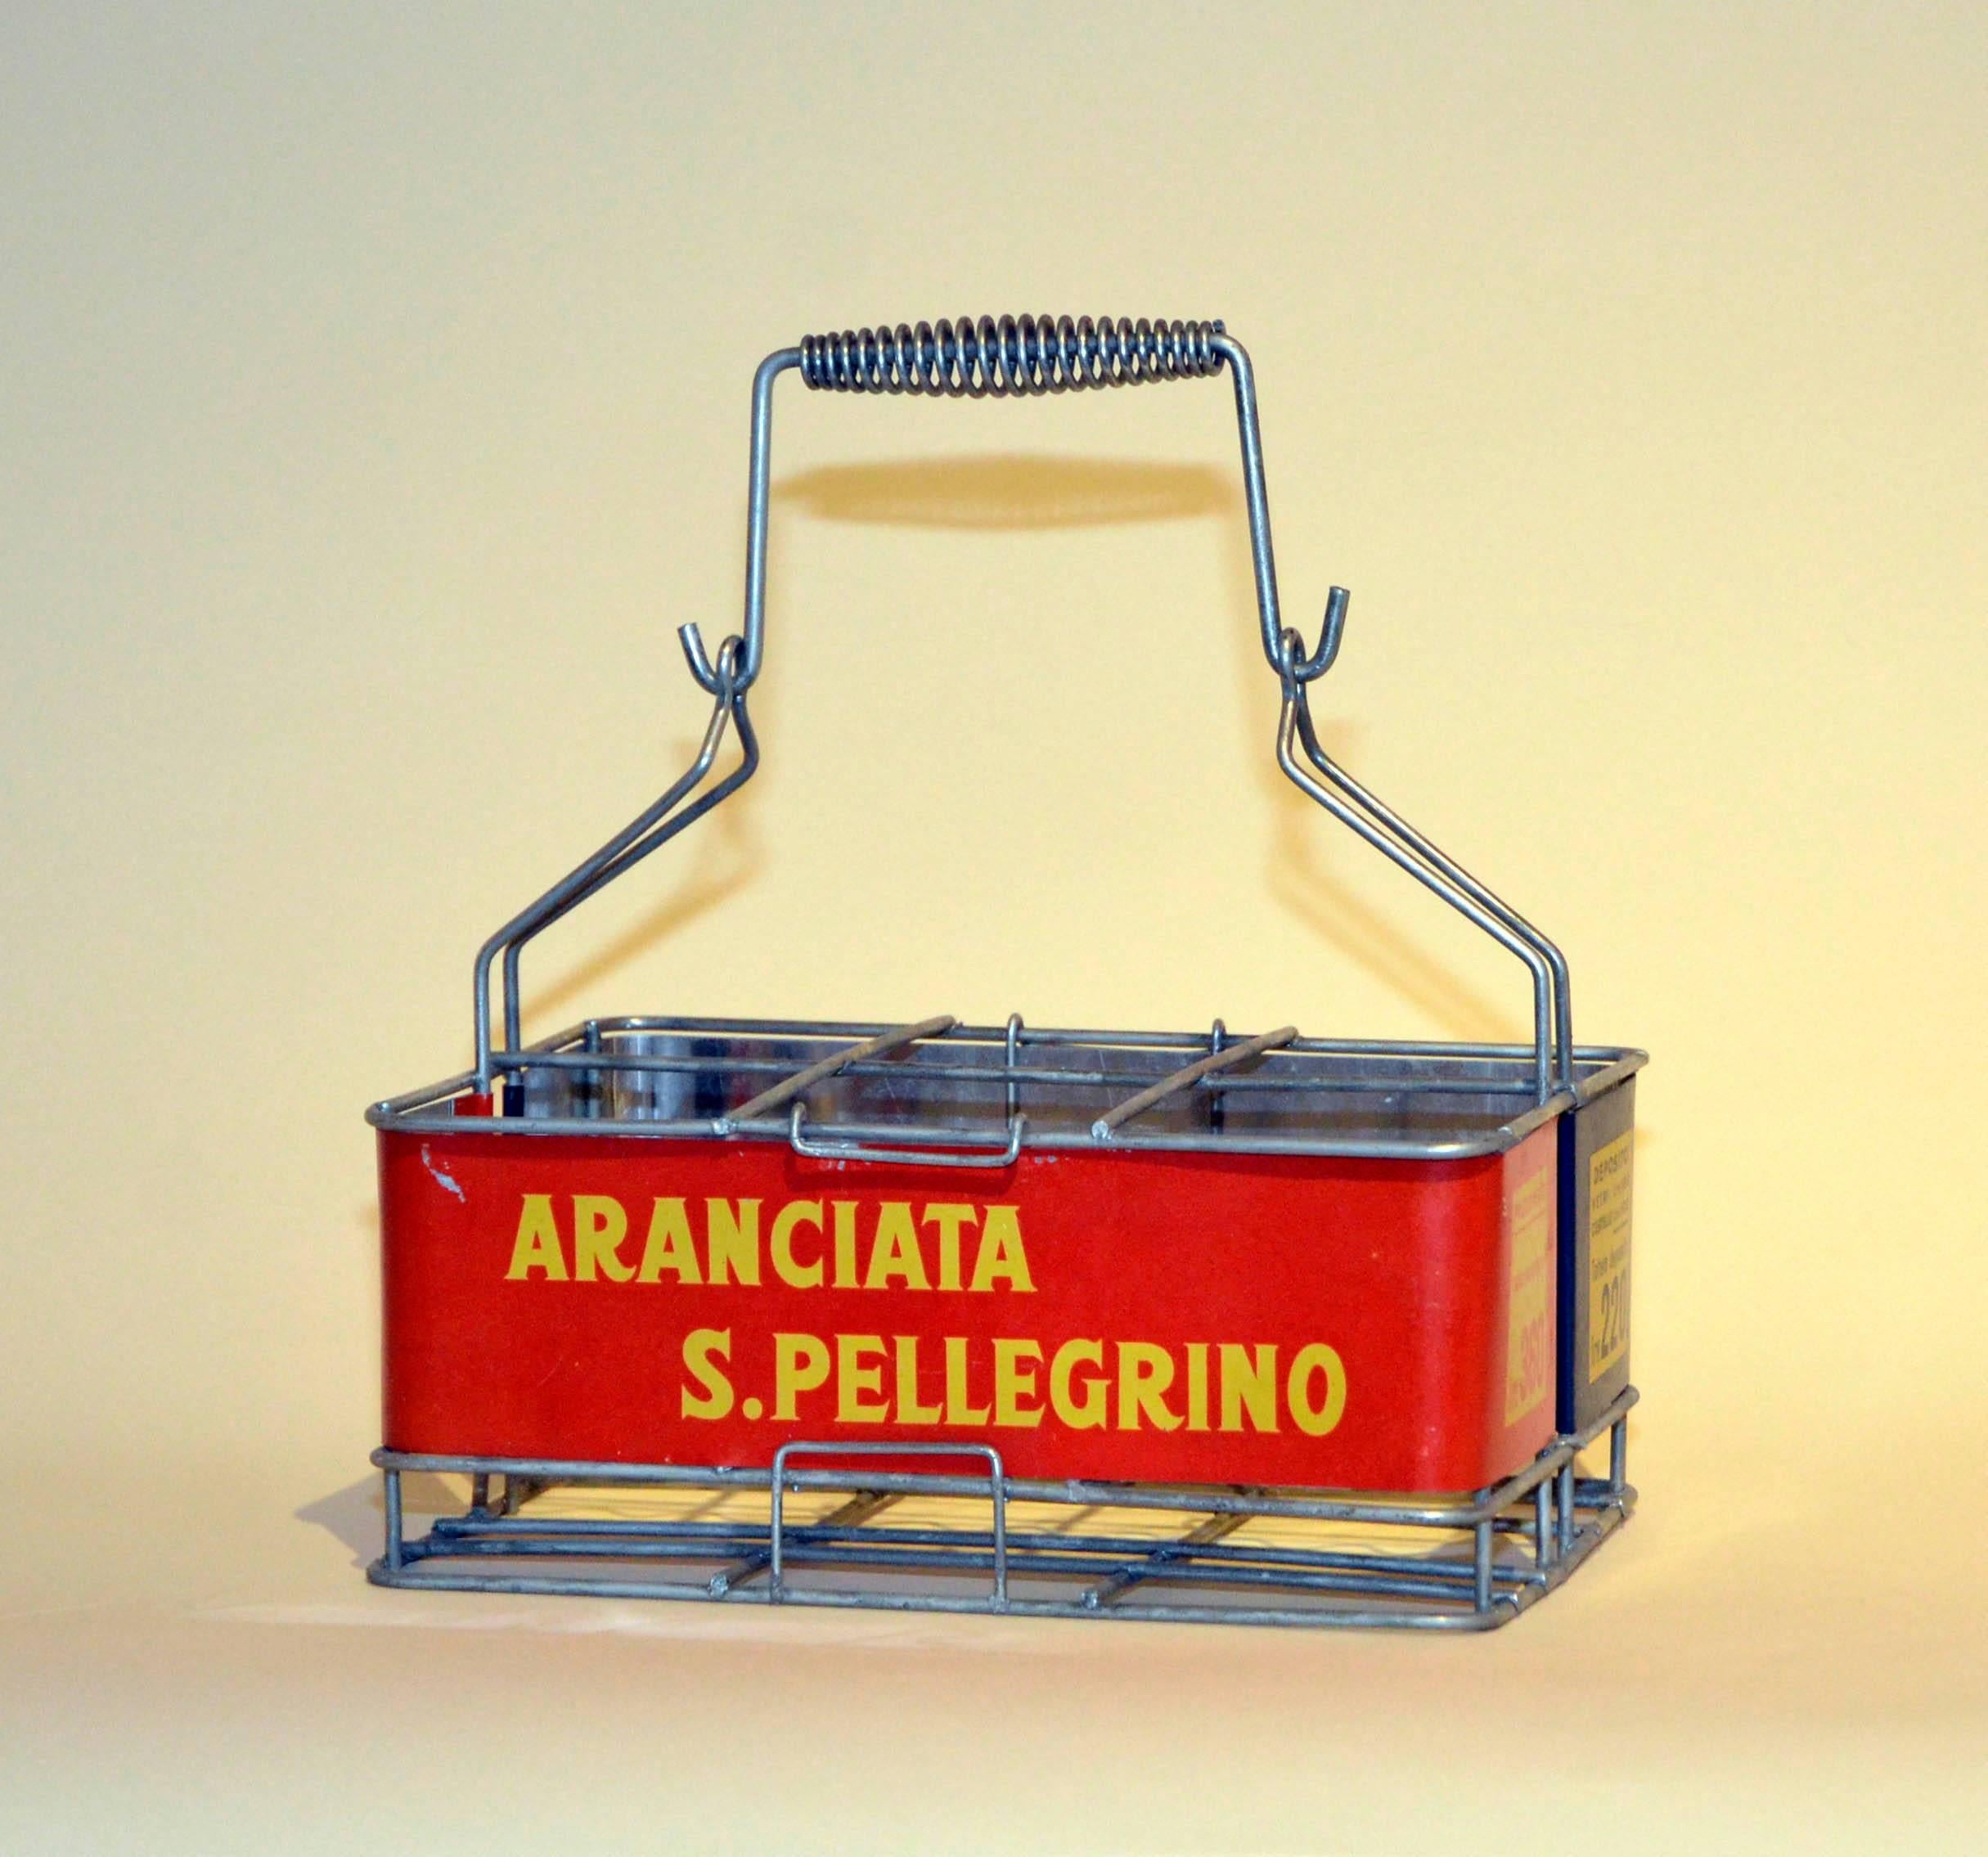 This very curious vintage metal San Pellegrino bottle basket, in red, yellow and blue, was used in the 1960s in Italy to deliver San Pellegrino's famed sodas, 